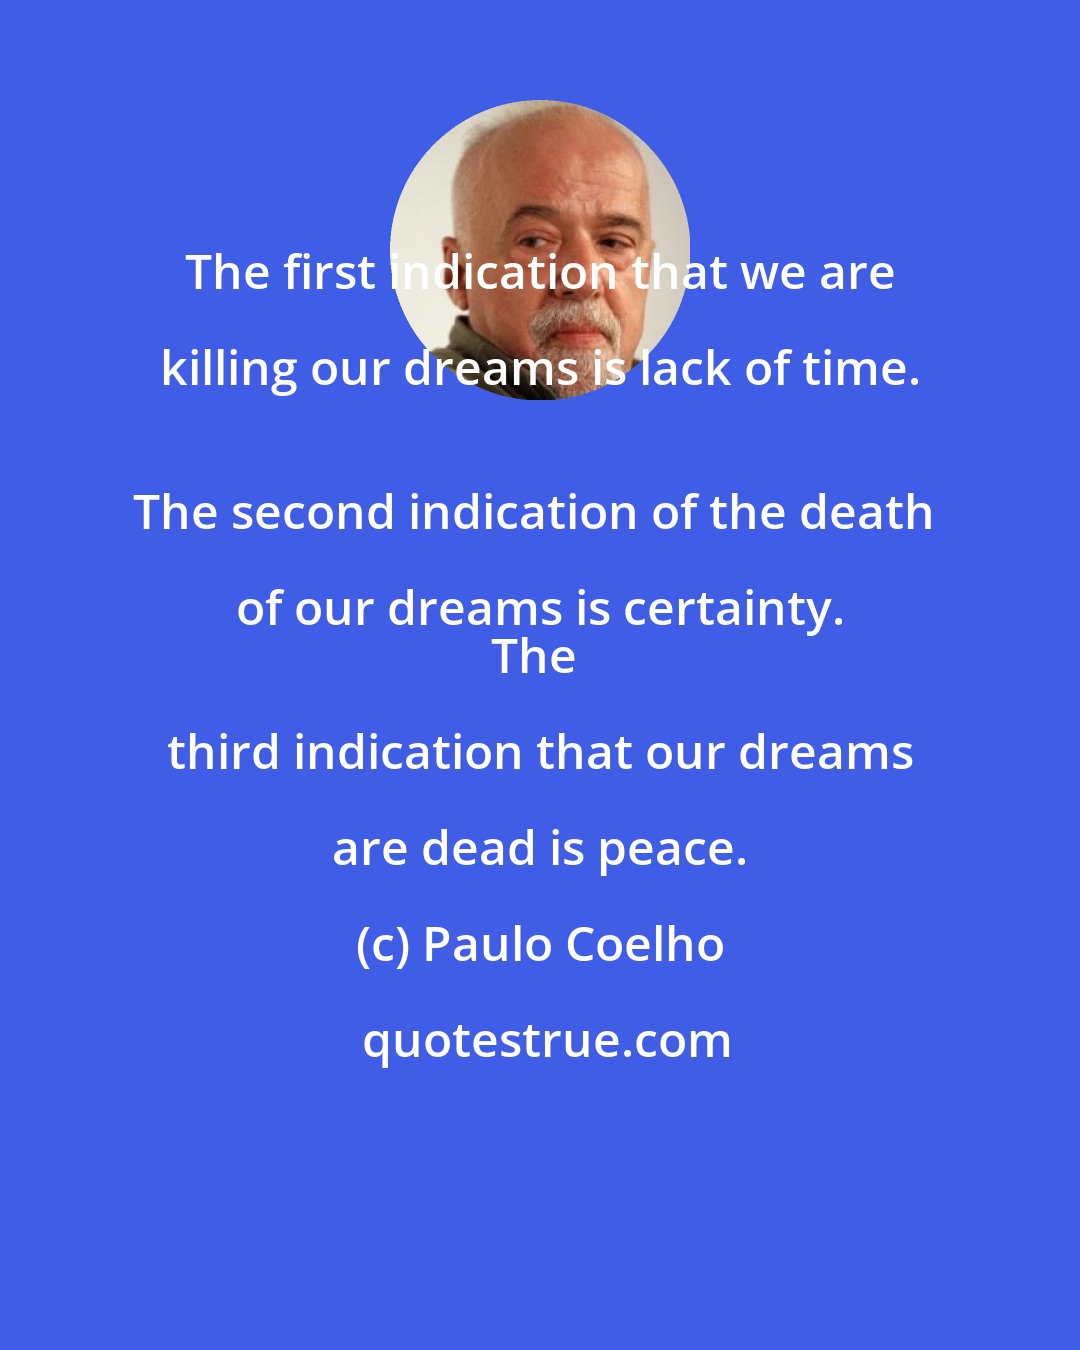 Paulo Coelho: The first indication that we are killing our dreams is lack of time. 
The second indication of the death of our dreams is certainty. 
The third indication that our dreams are dead is peace.